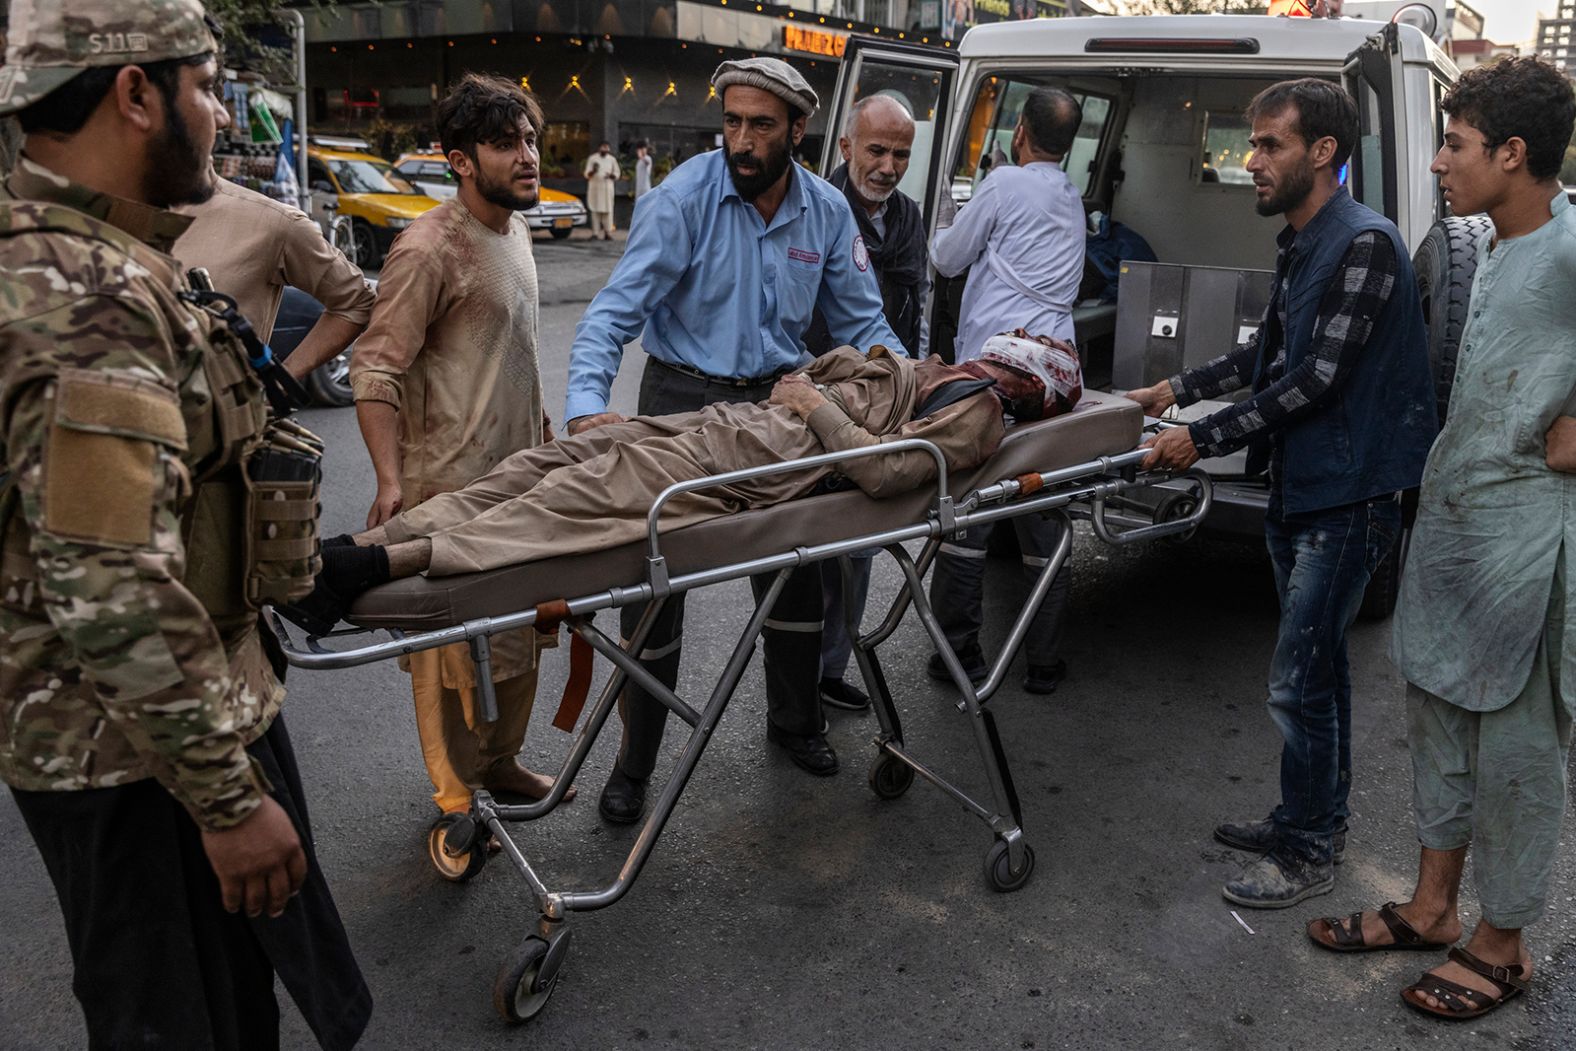 An injured person arrives at a hospital after <a href="index.php?page=&url=https%3A%2F%2Fwww.cnn.com%2F2021%2F08%2F26%2Fasia%2Fafghanistan-kabul-airport-blast-intl%2Findex.html" target="_blank">a suicide bomb attack</a> caused casualties on Thursday, August 26, outside the international airport in Kabul, Afghanistan.